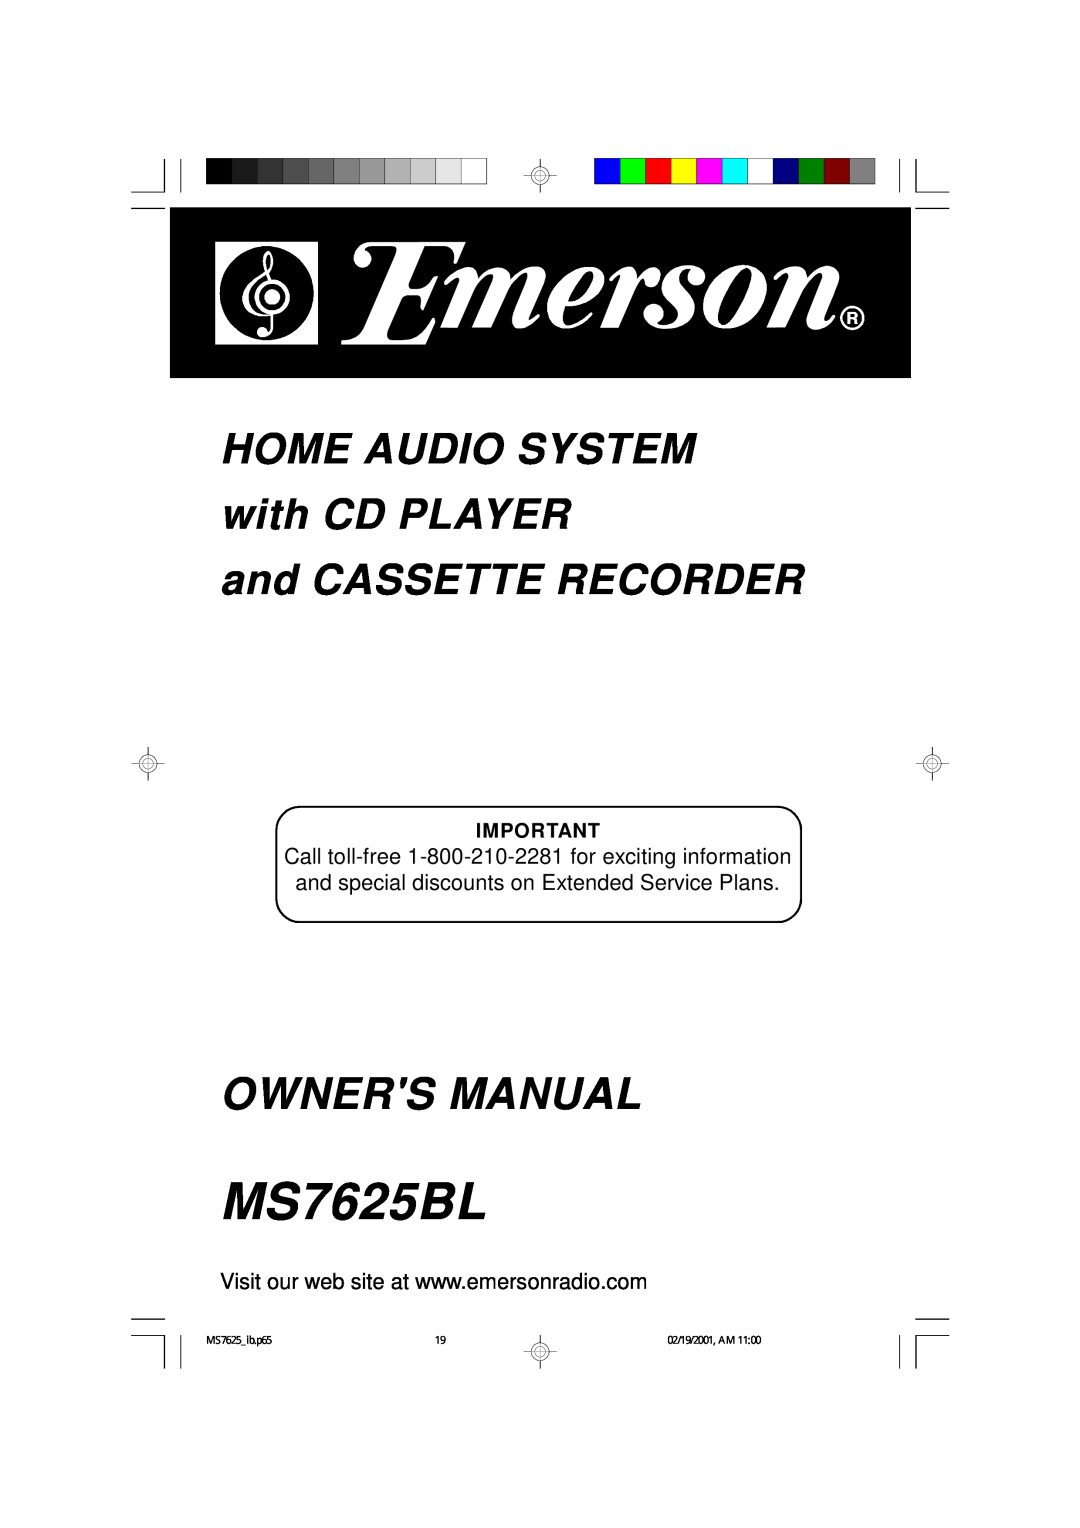 Emerson owner manual MS7625BL, HOME AUDIO SYSTEM with CD PLAYER, and CASSETTE RECORDER, 韗曚蠖鞥縏莥蹭鞢 